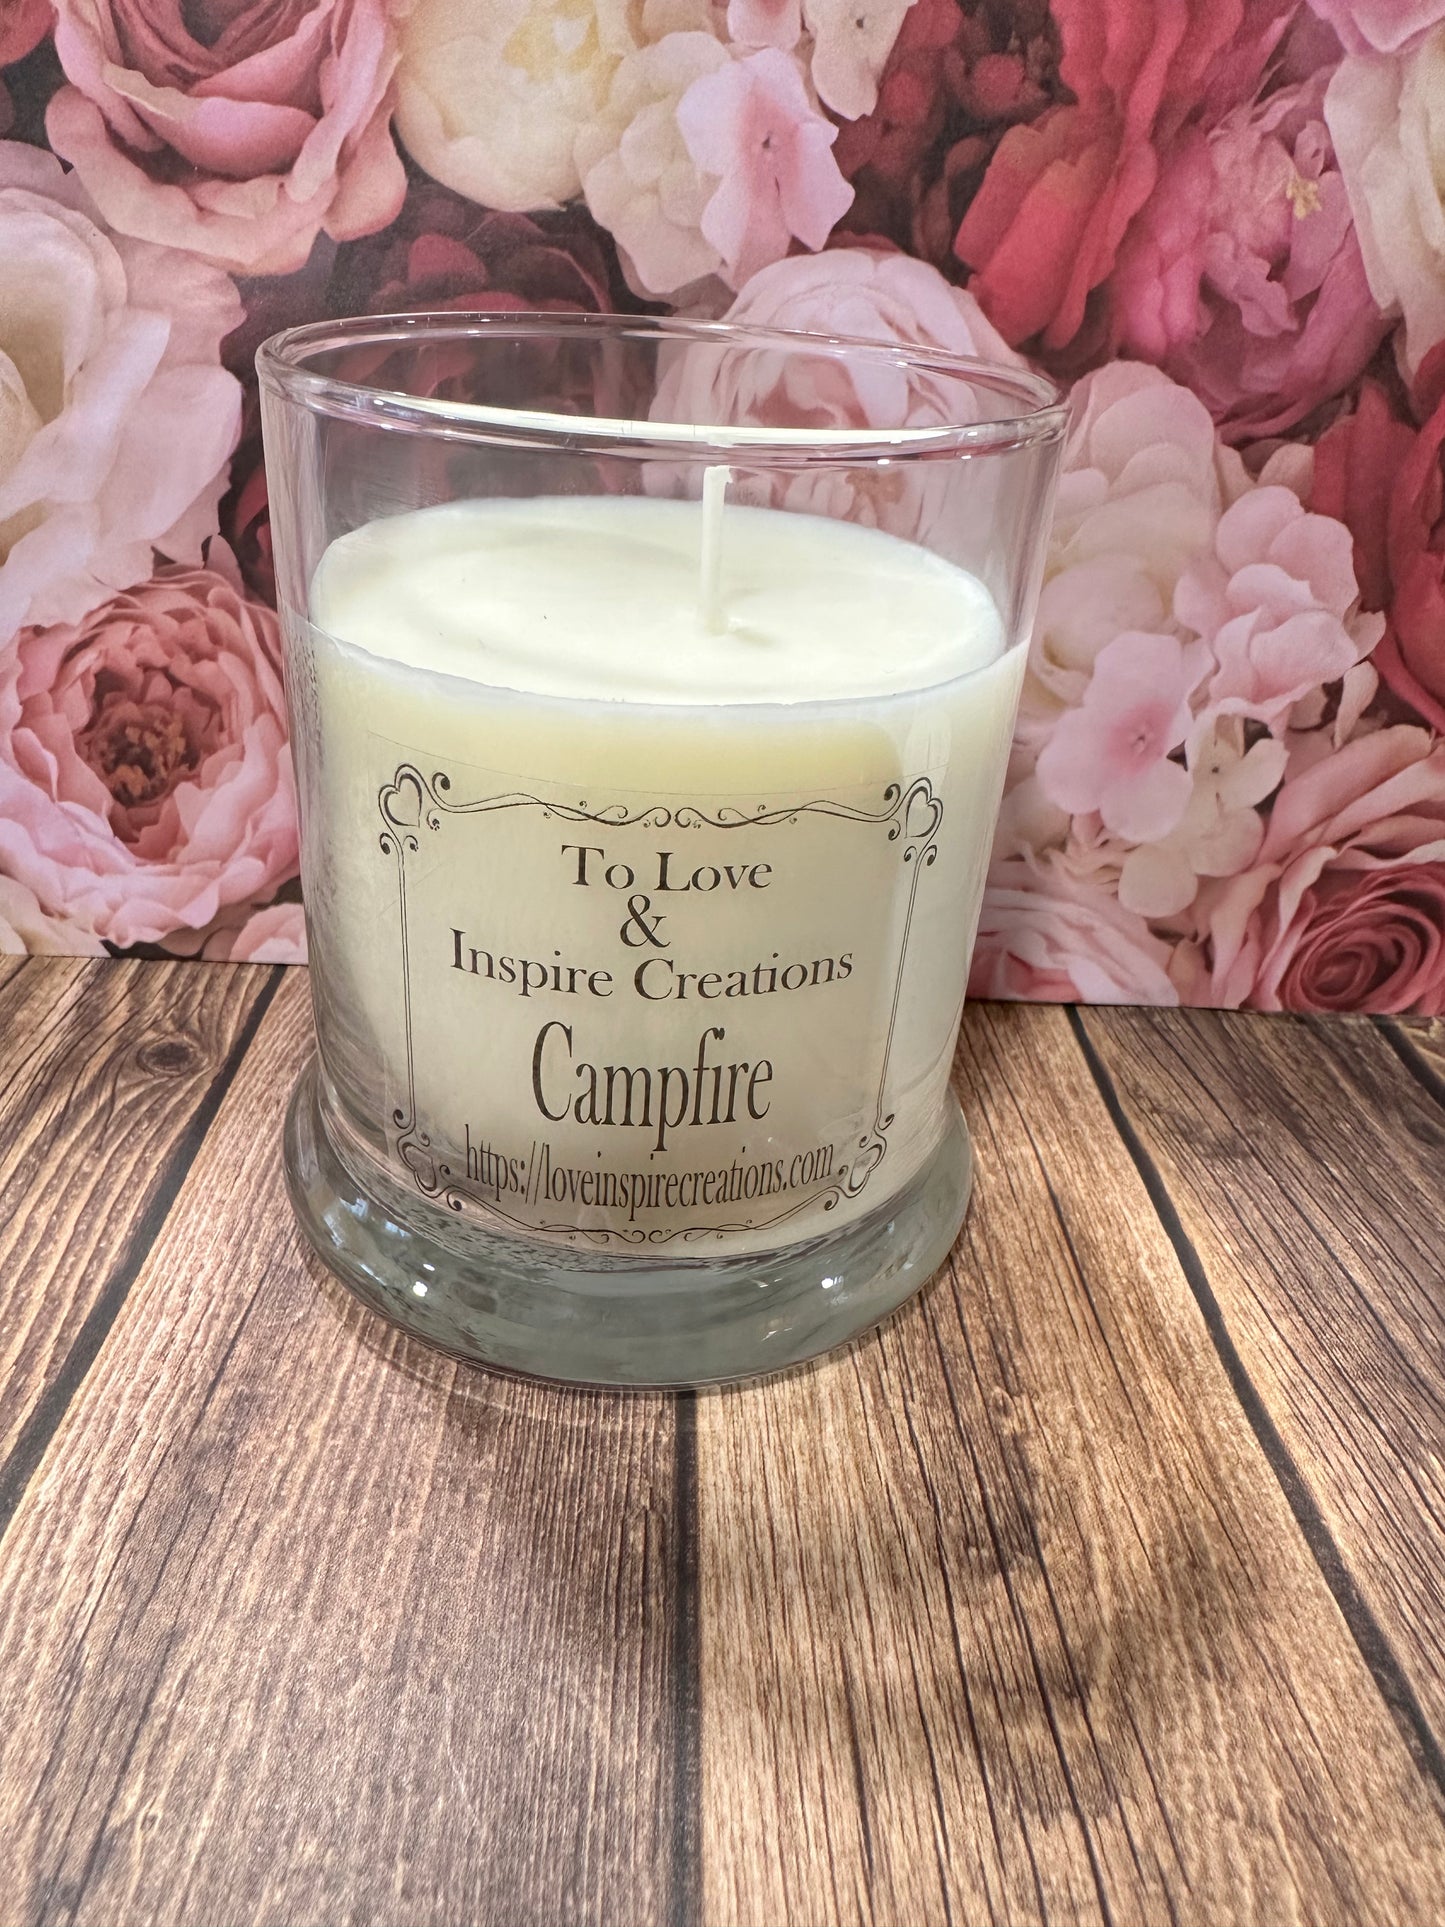 Round campfire candle